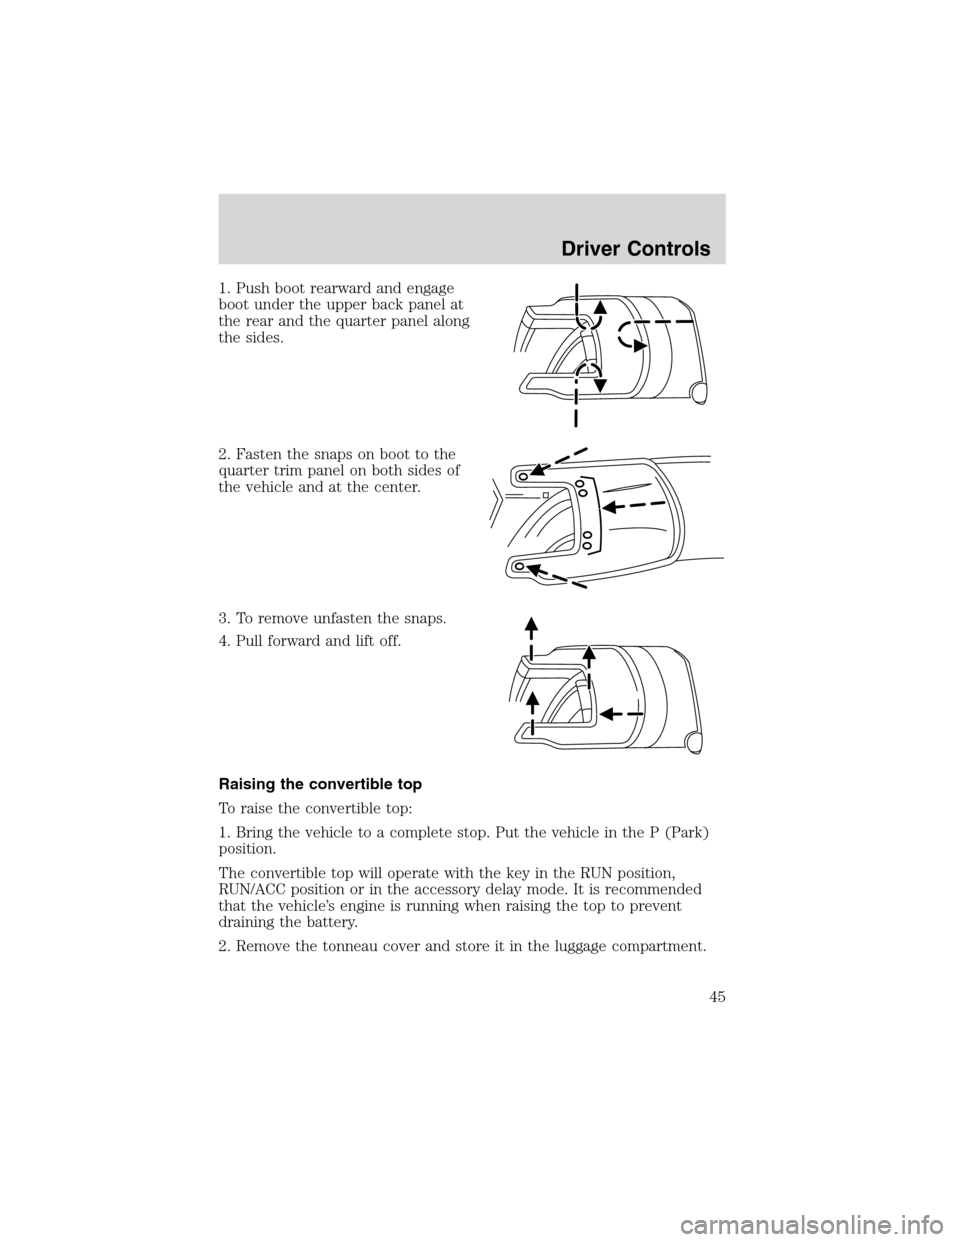 FORD THUNDERBIRD 2003 11.G User Guide 1. Push boot rearward and engage
boot under the upper back panel at
the rear and the quarter panel along
the sides.
2. Fasten the snaps on boot to the
quarter trim panel on both sides of
the vehicle a